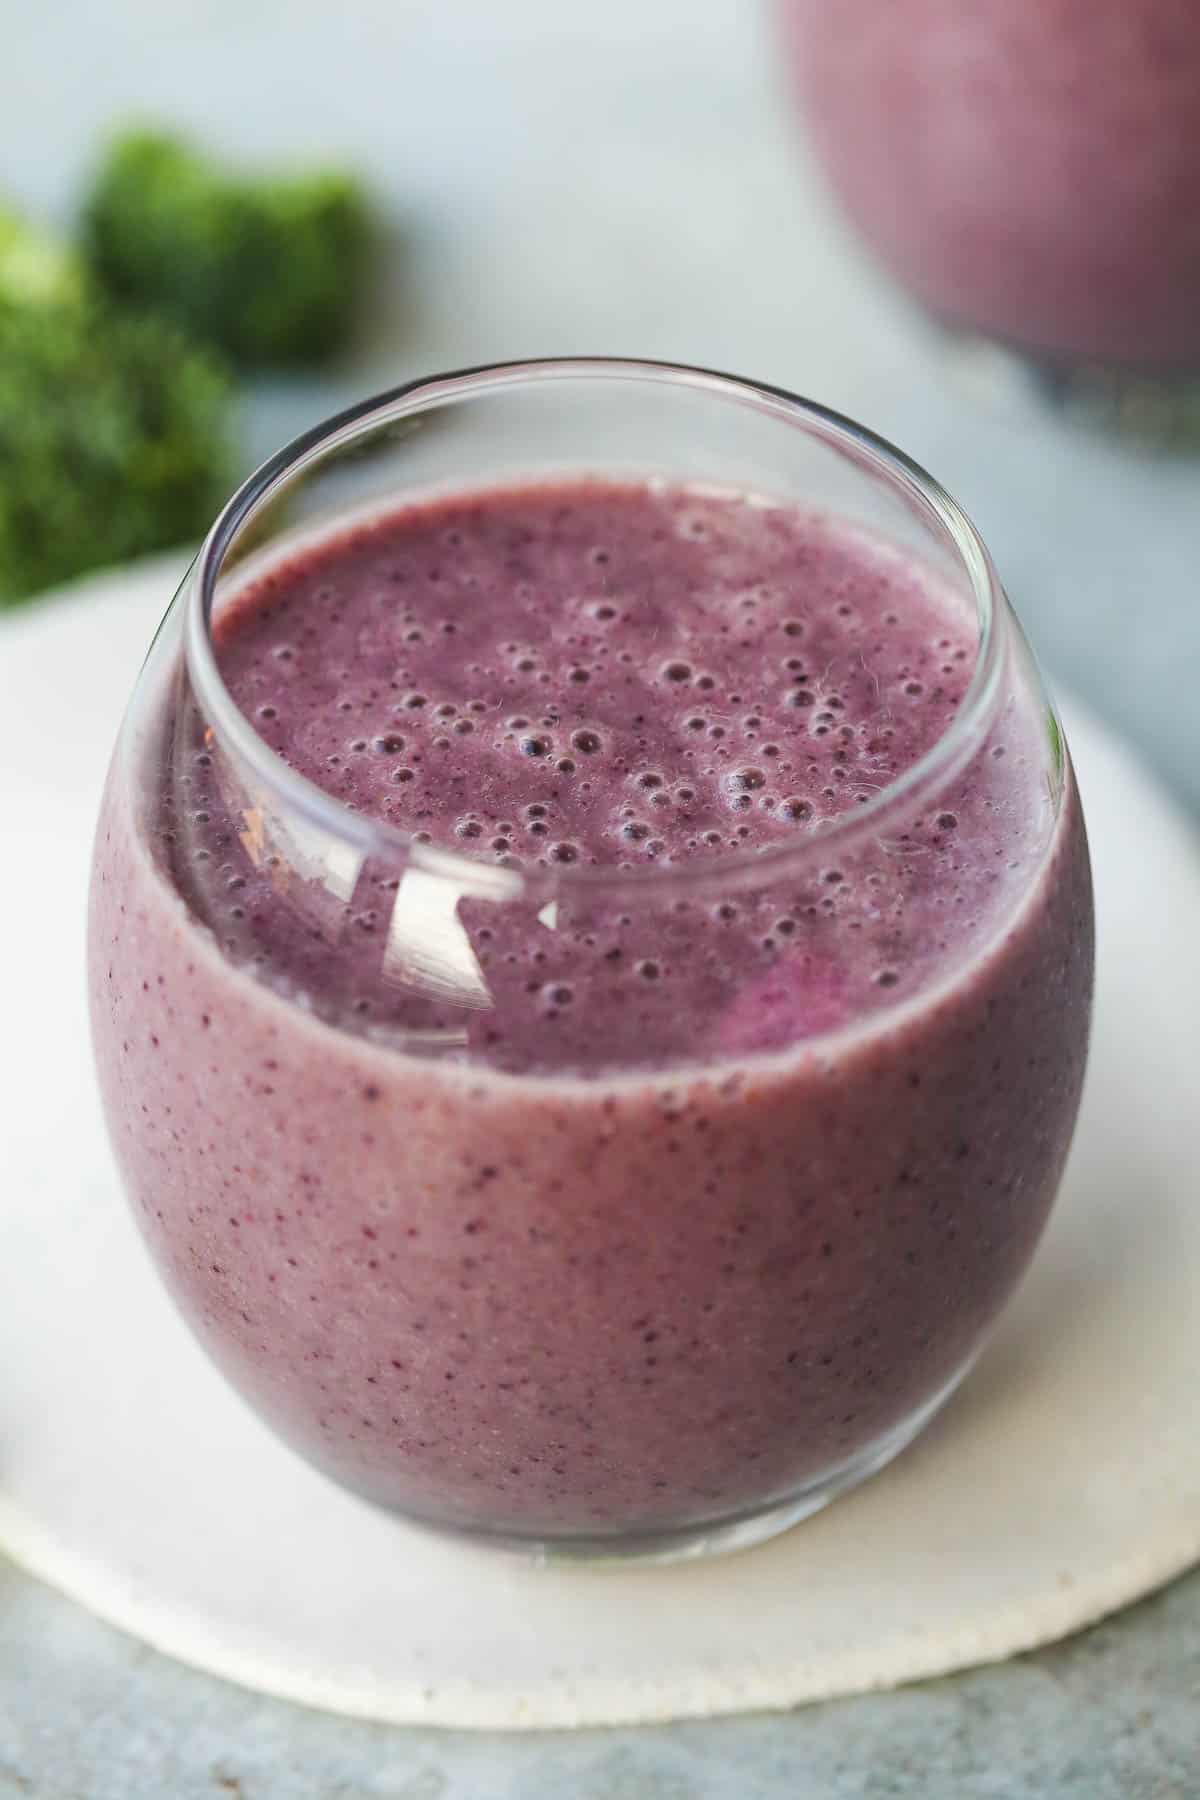 Mouthwatering smoothie served in a glass that's placed over a plate.